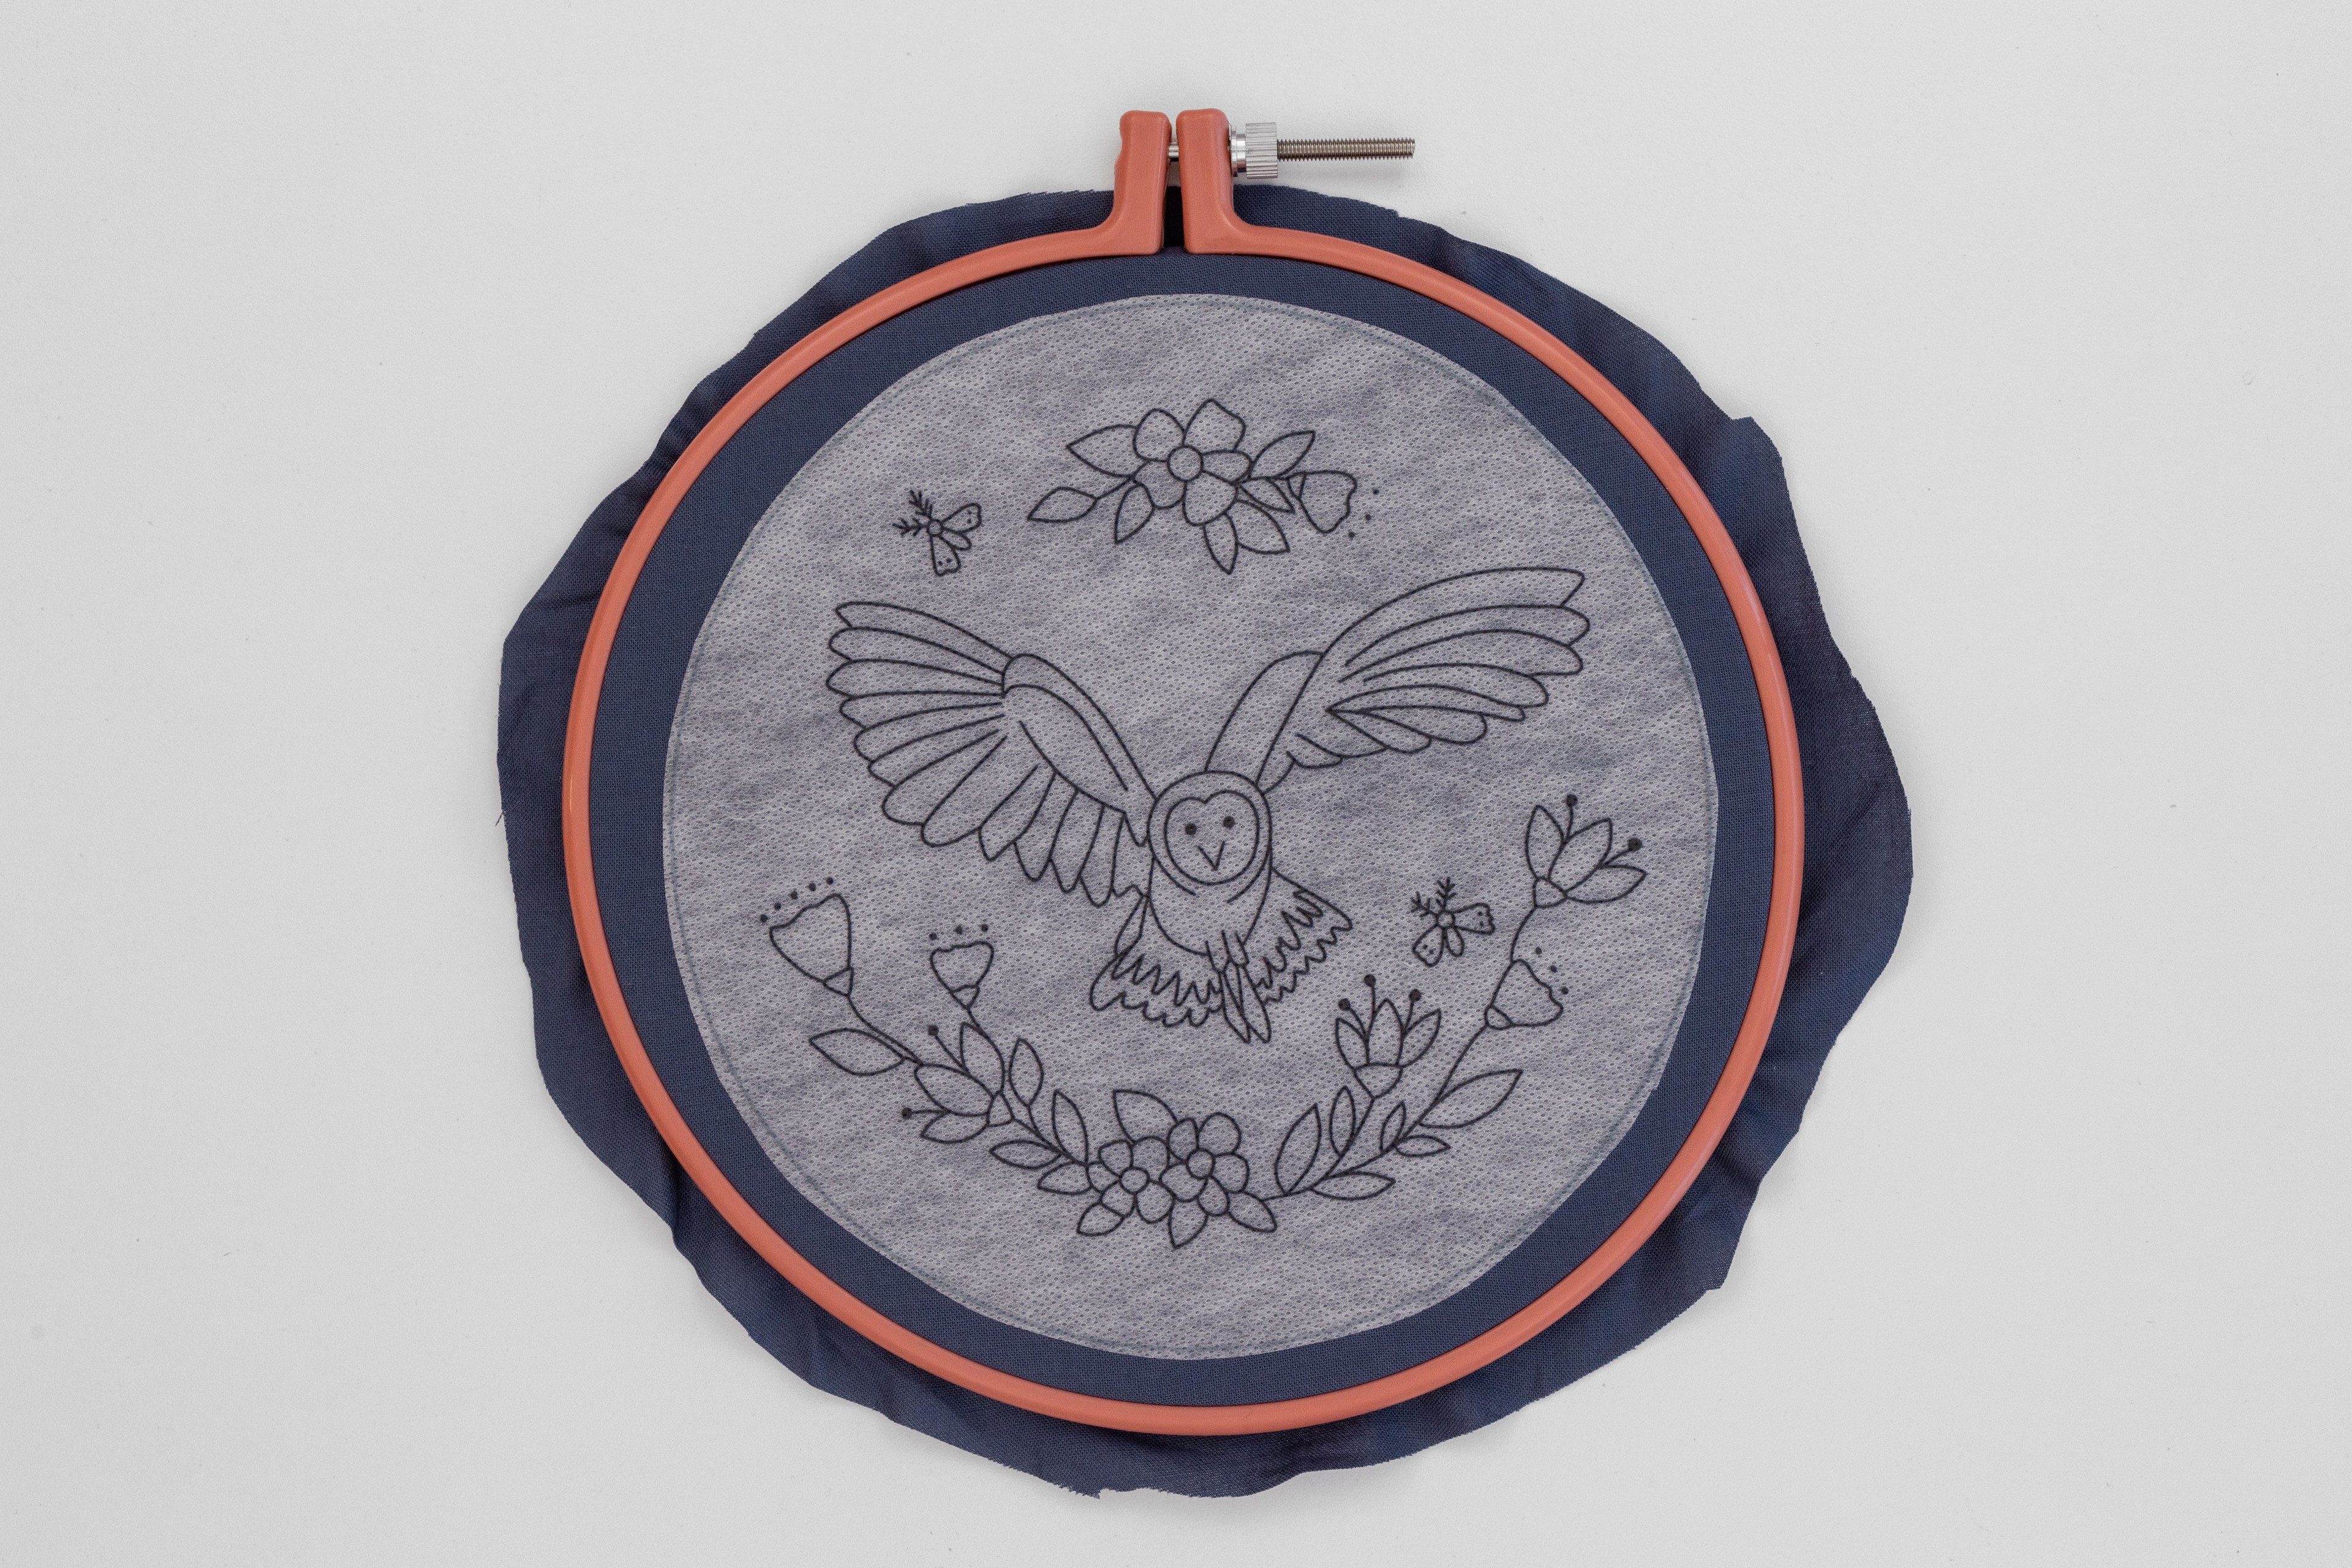 The Night Owl pattern is stuck onto the hoop.